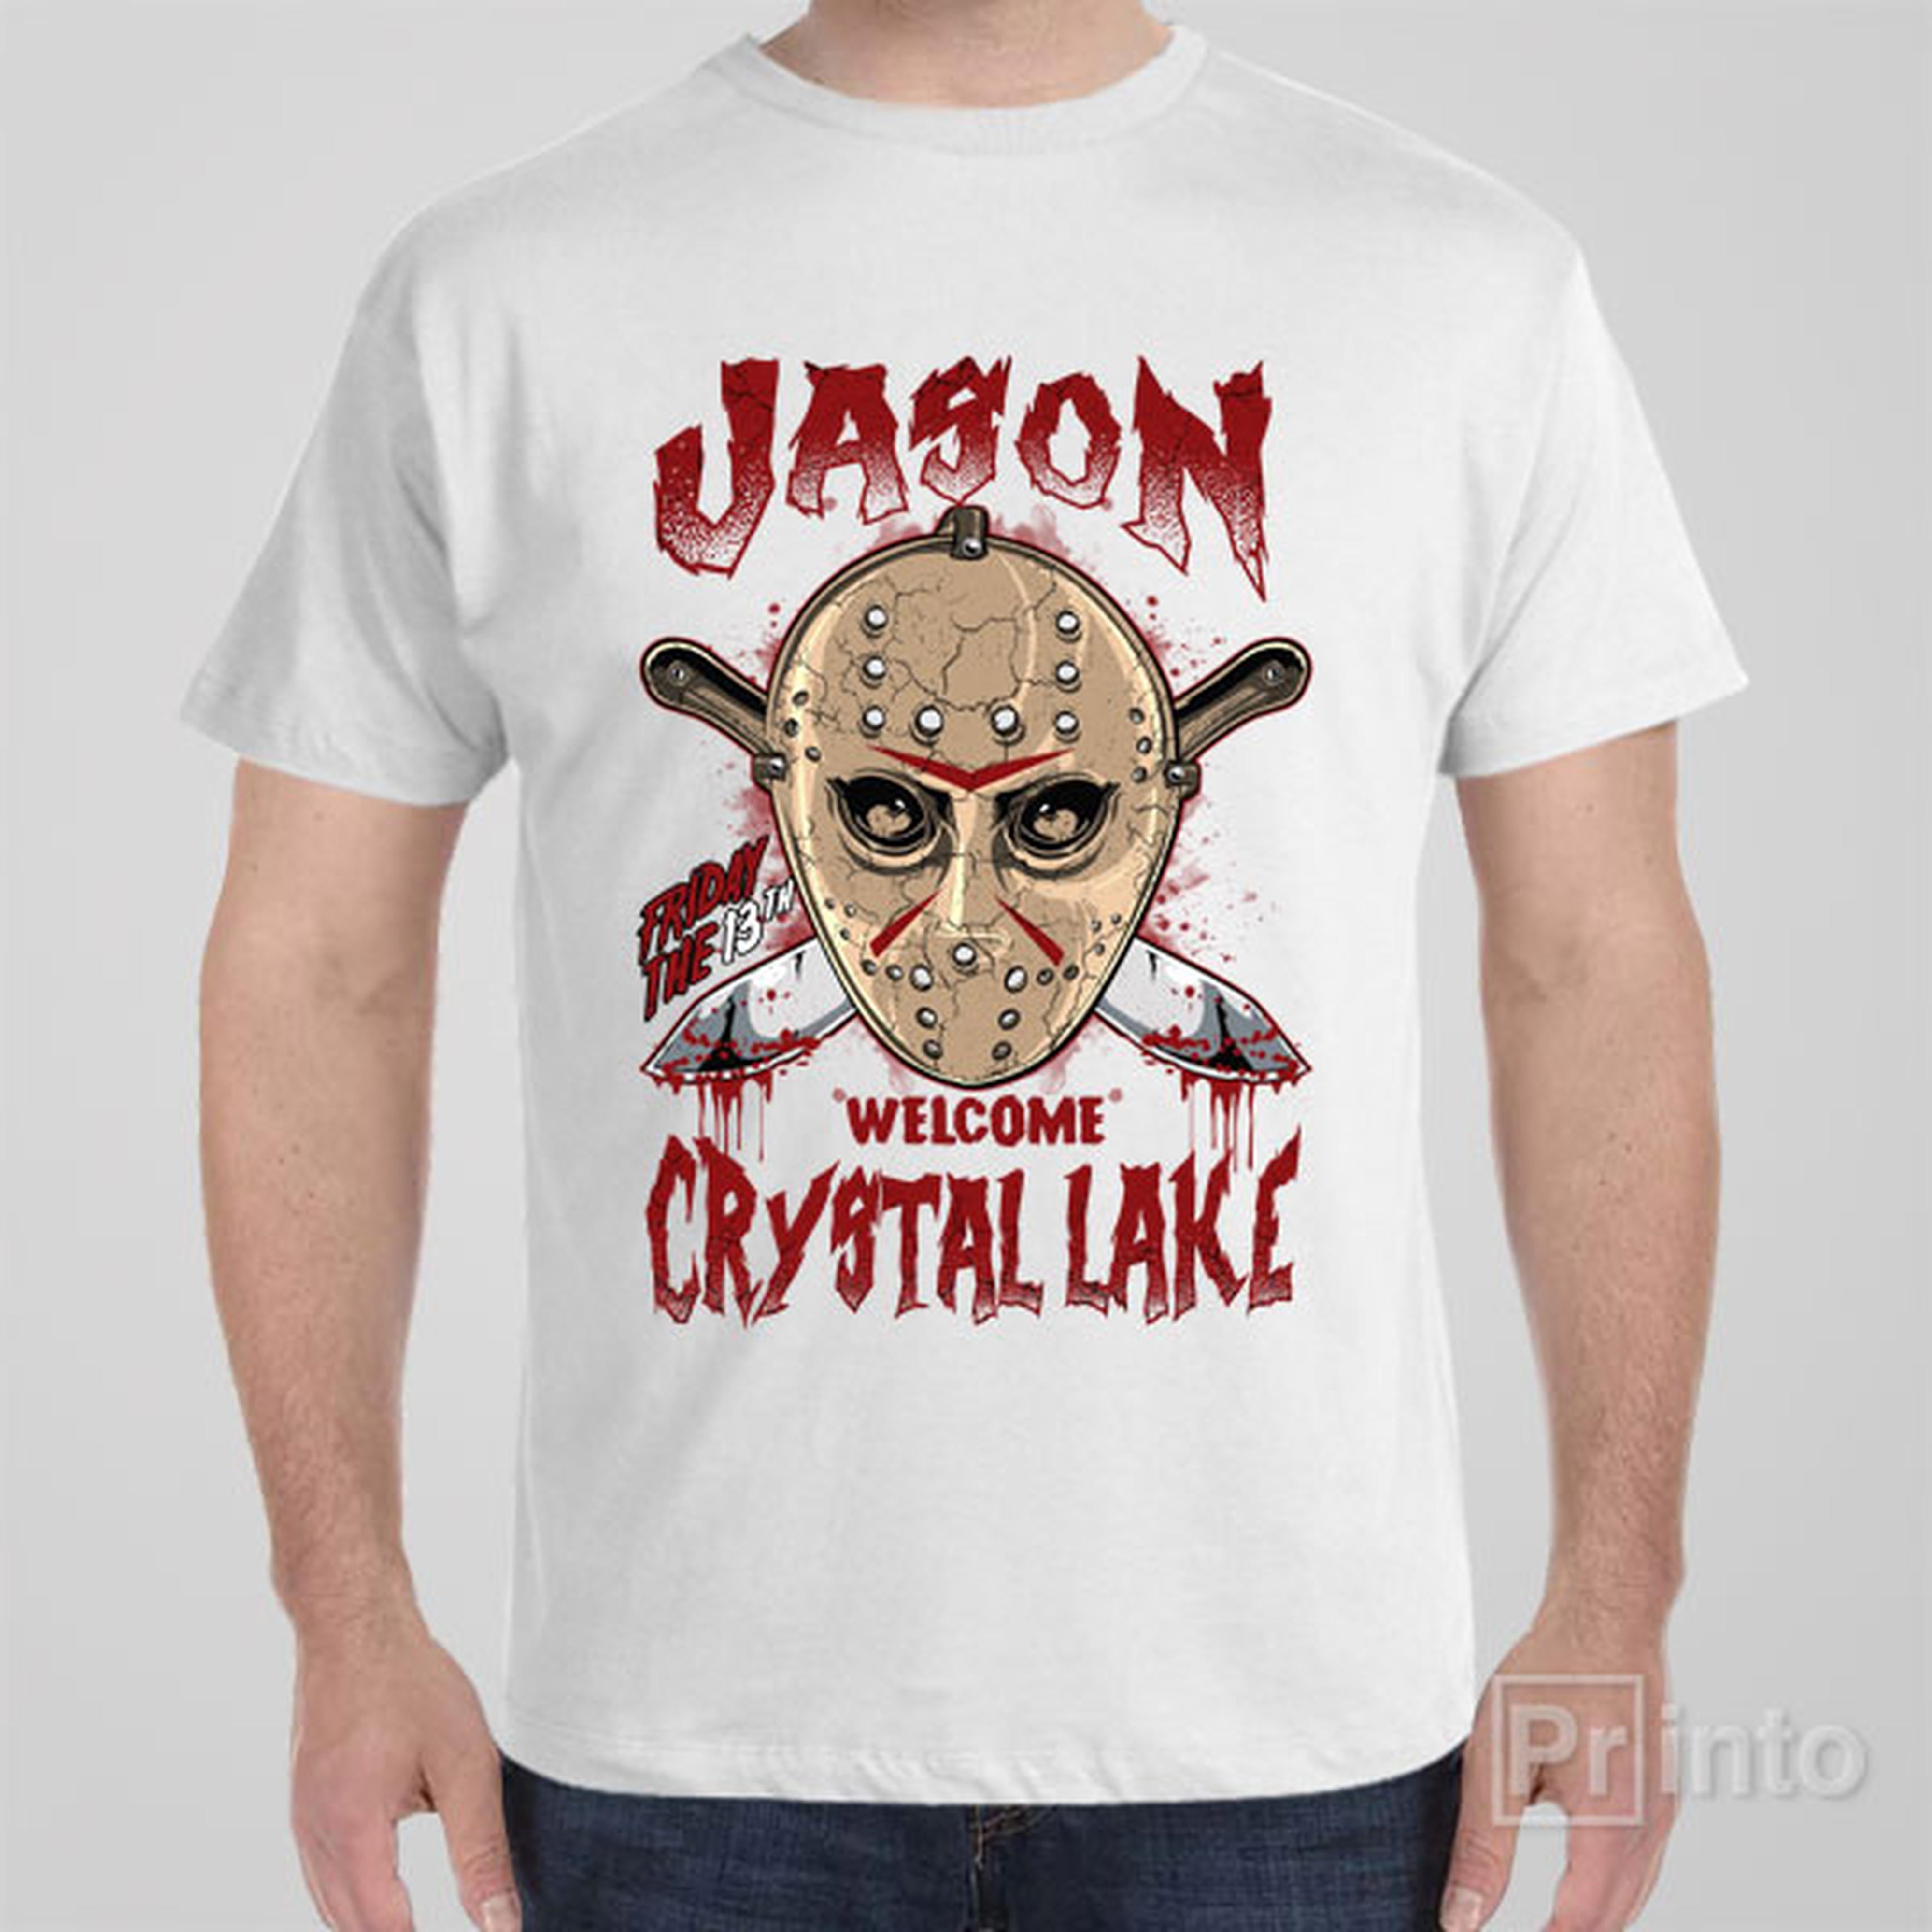 welcome-to-crystal-lake-t-shirt